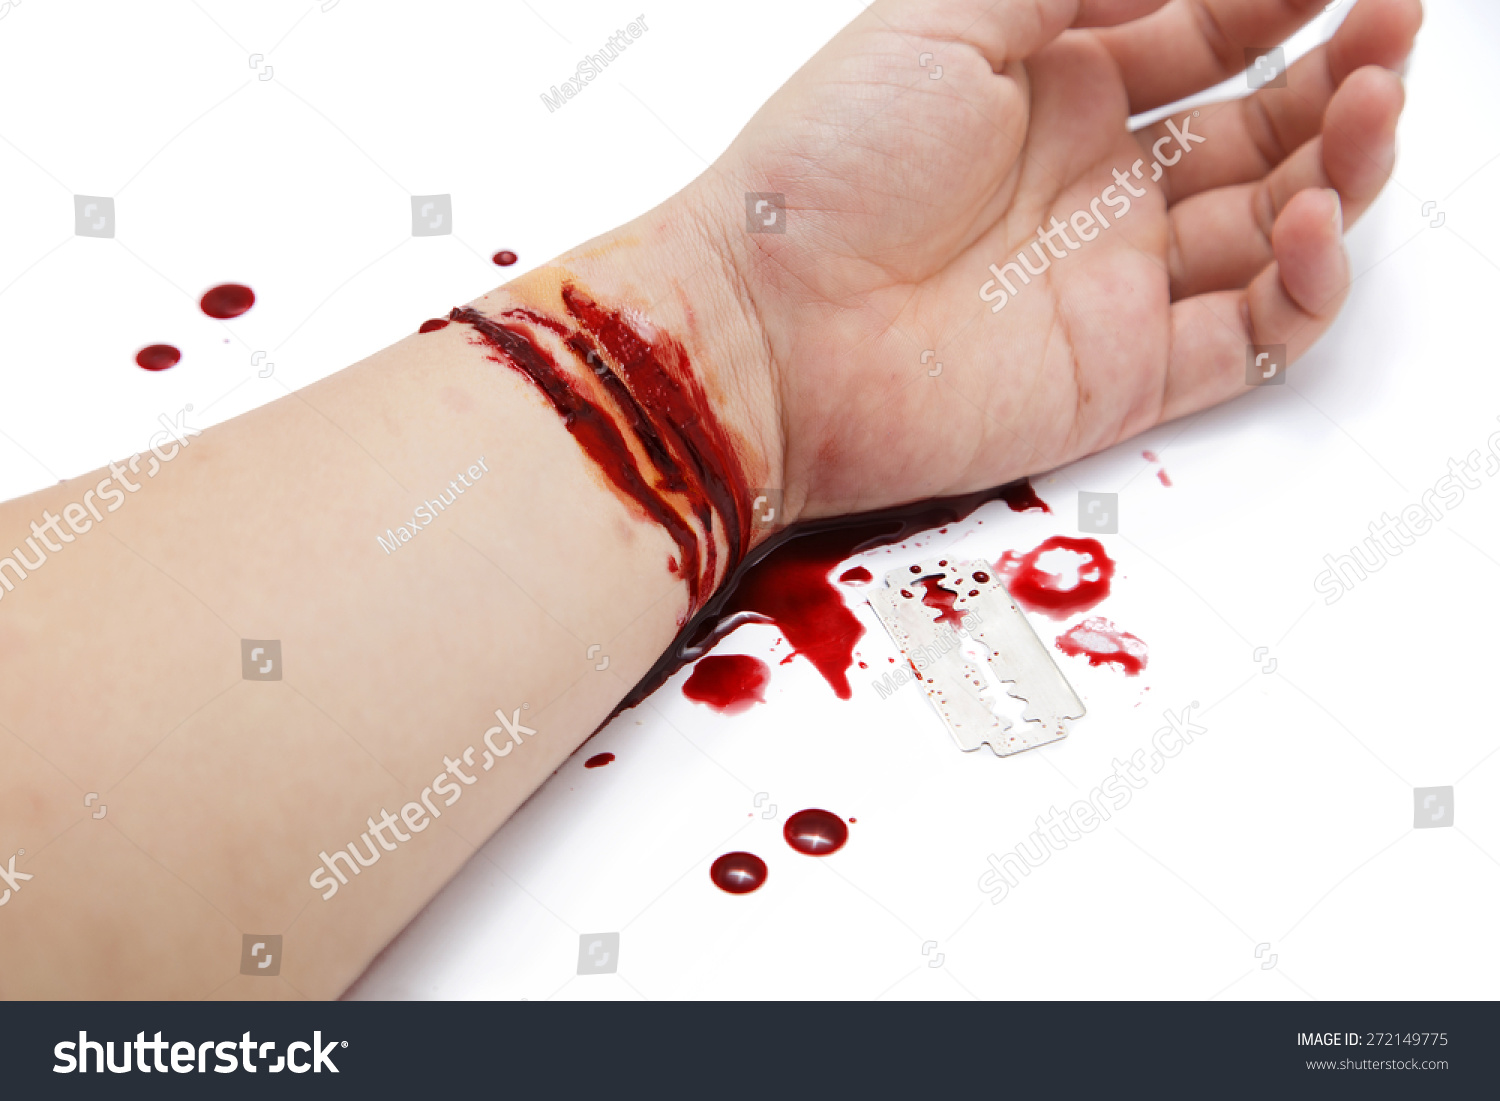 Hand Full Blood Wrist Cut By Stock Photo Edit Now 272149775